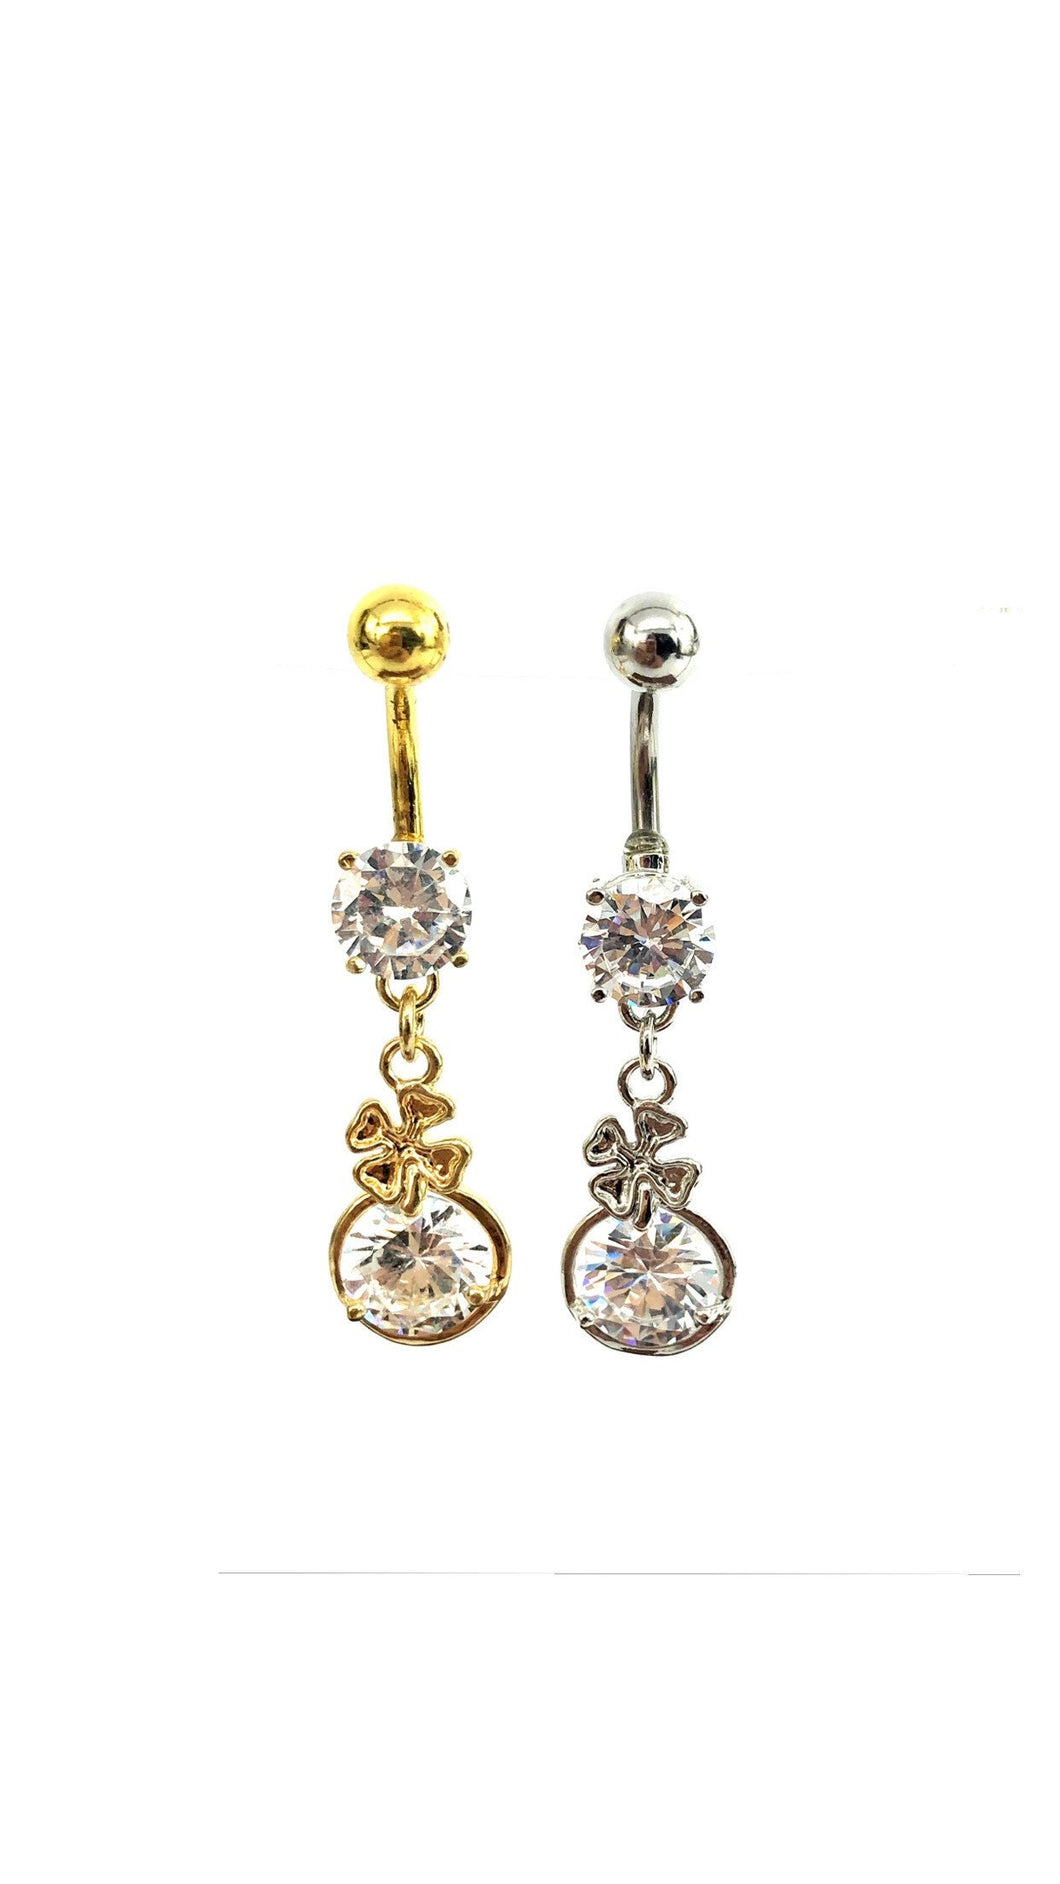 Stainless steel curve bar , double flower gem belly ring, SKU# 10-7